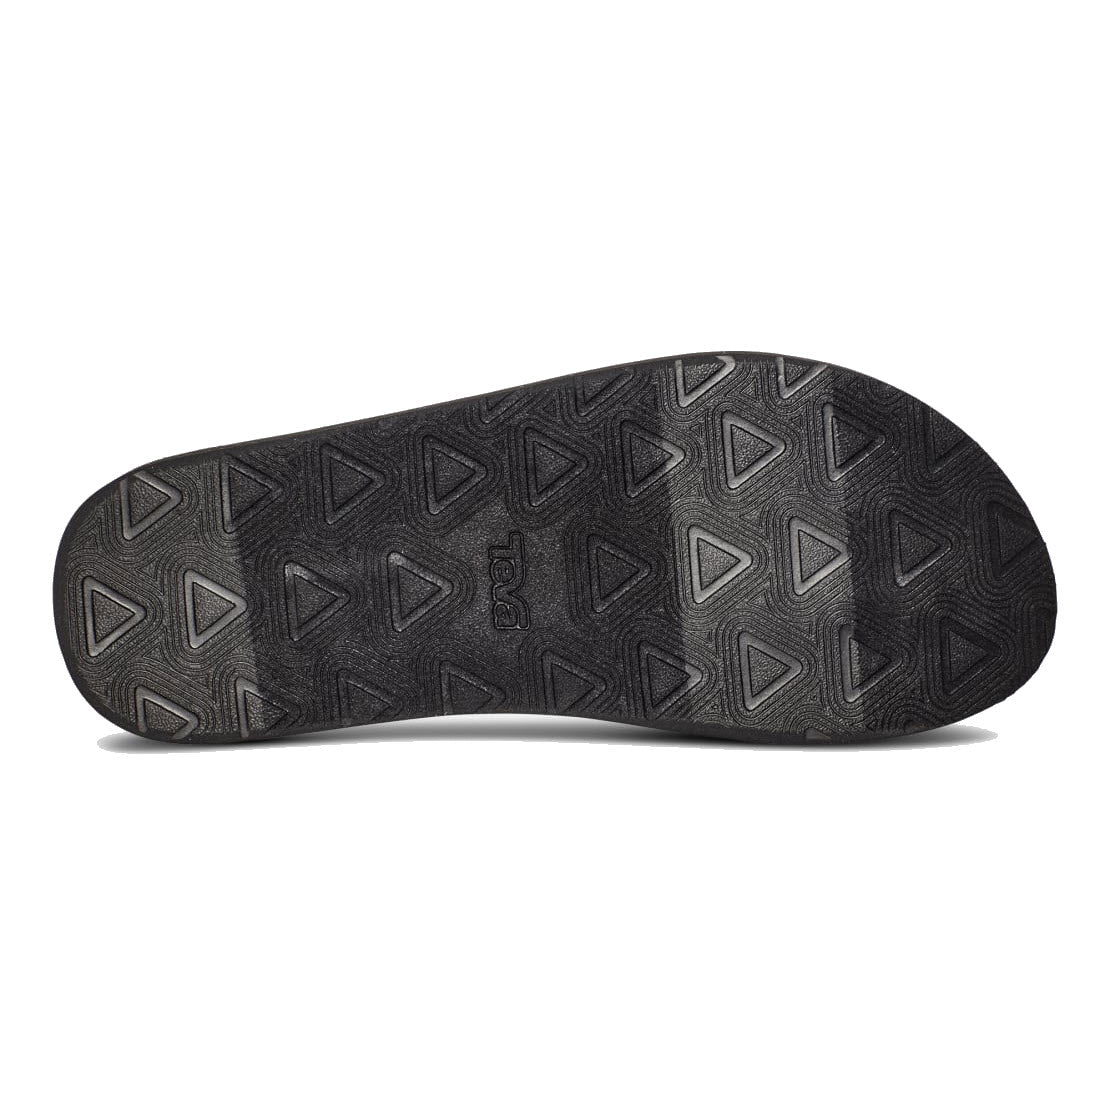 A black TEVA REFLIP BLACK - MENS shoe sole with a triangular pattern design, crafted from recycled content and shown from the underside by Teva.